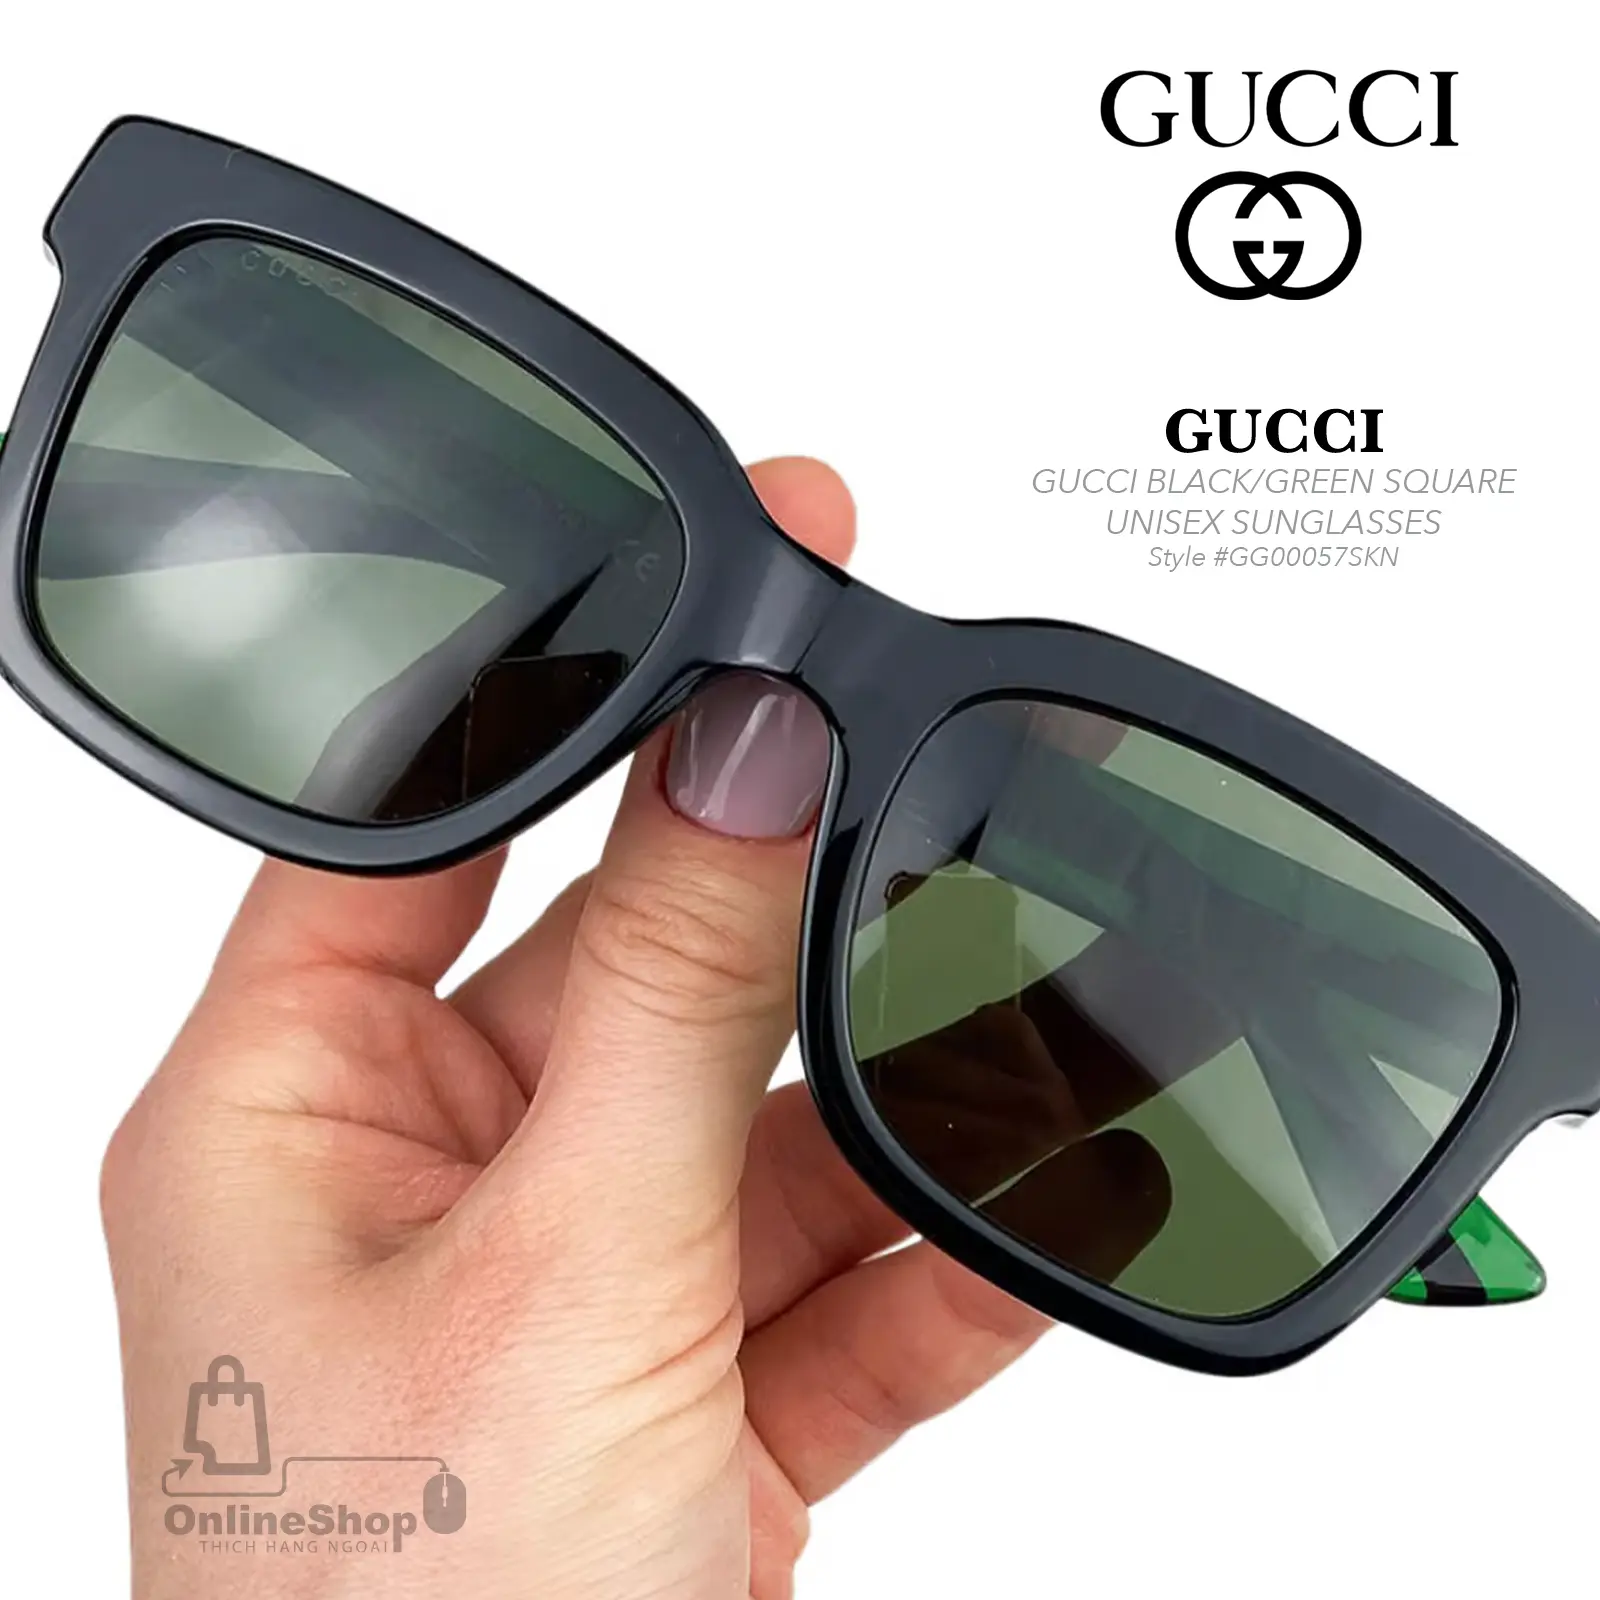 Mắt Kính Authentic GUCCI BLACK/GREEN SQUARE UNISEX SUNGLASSES GG00057SKN | Italy-hang-ngoai-nhap